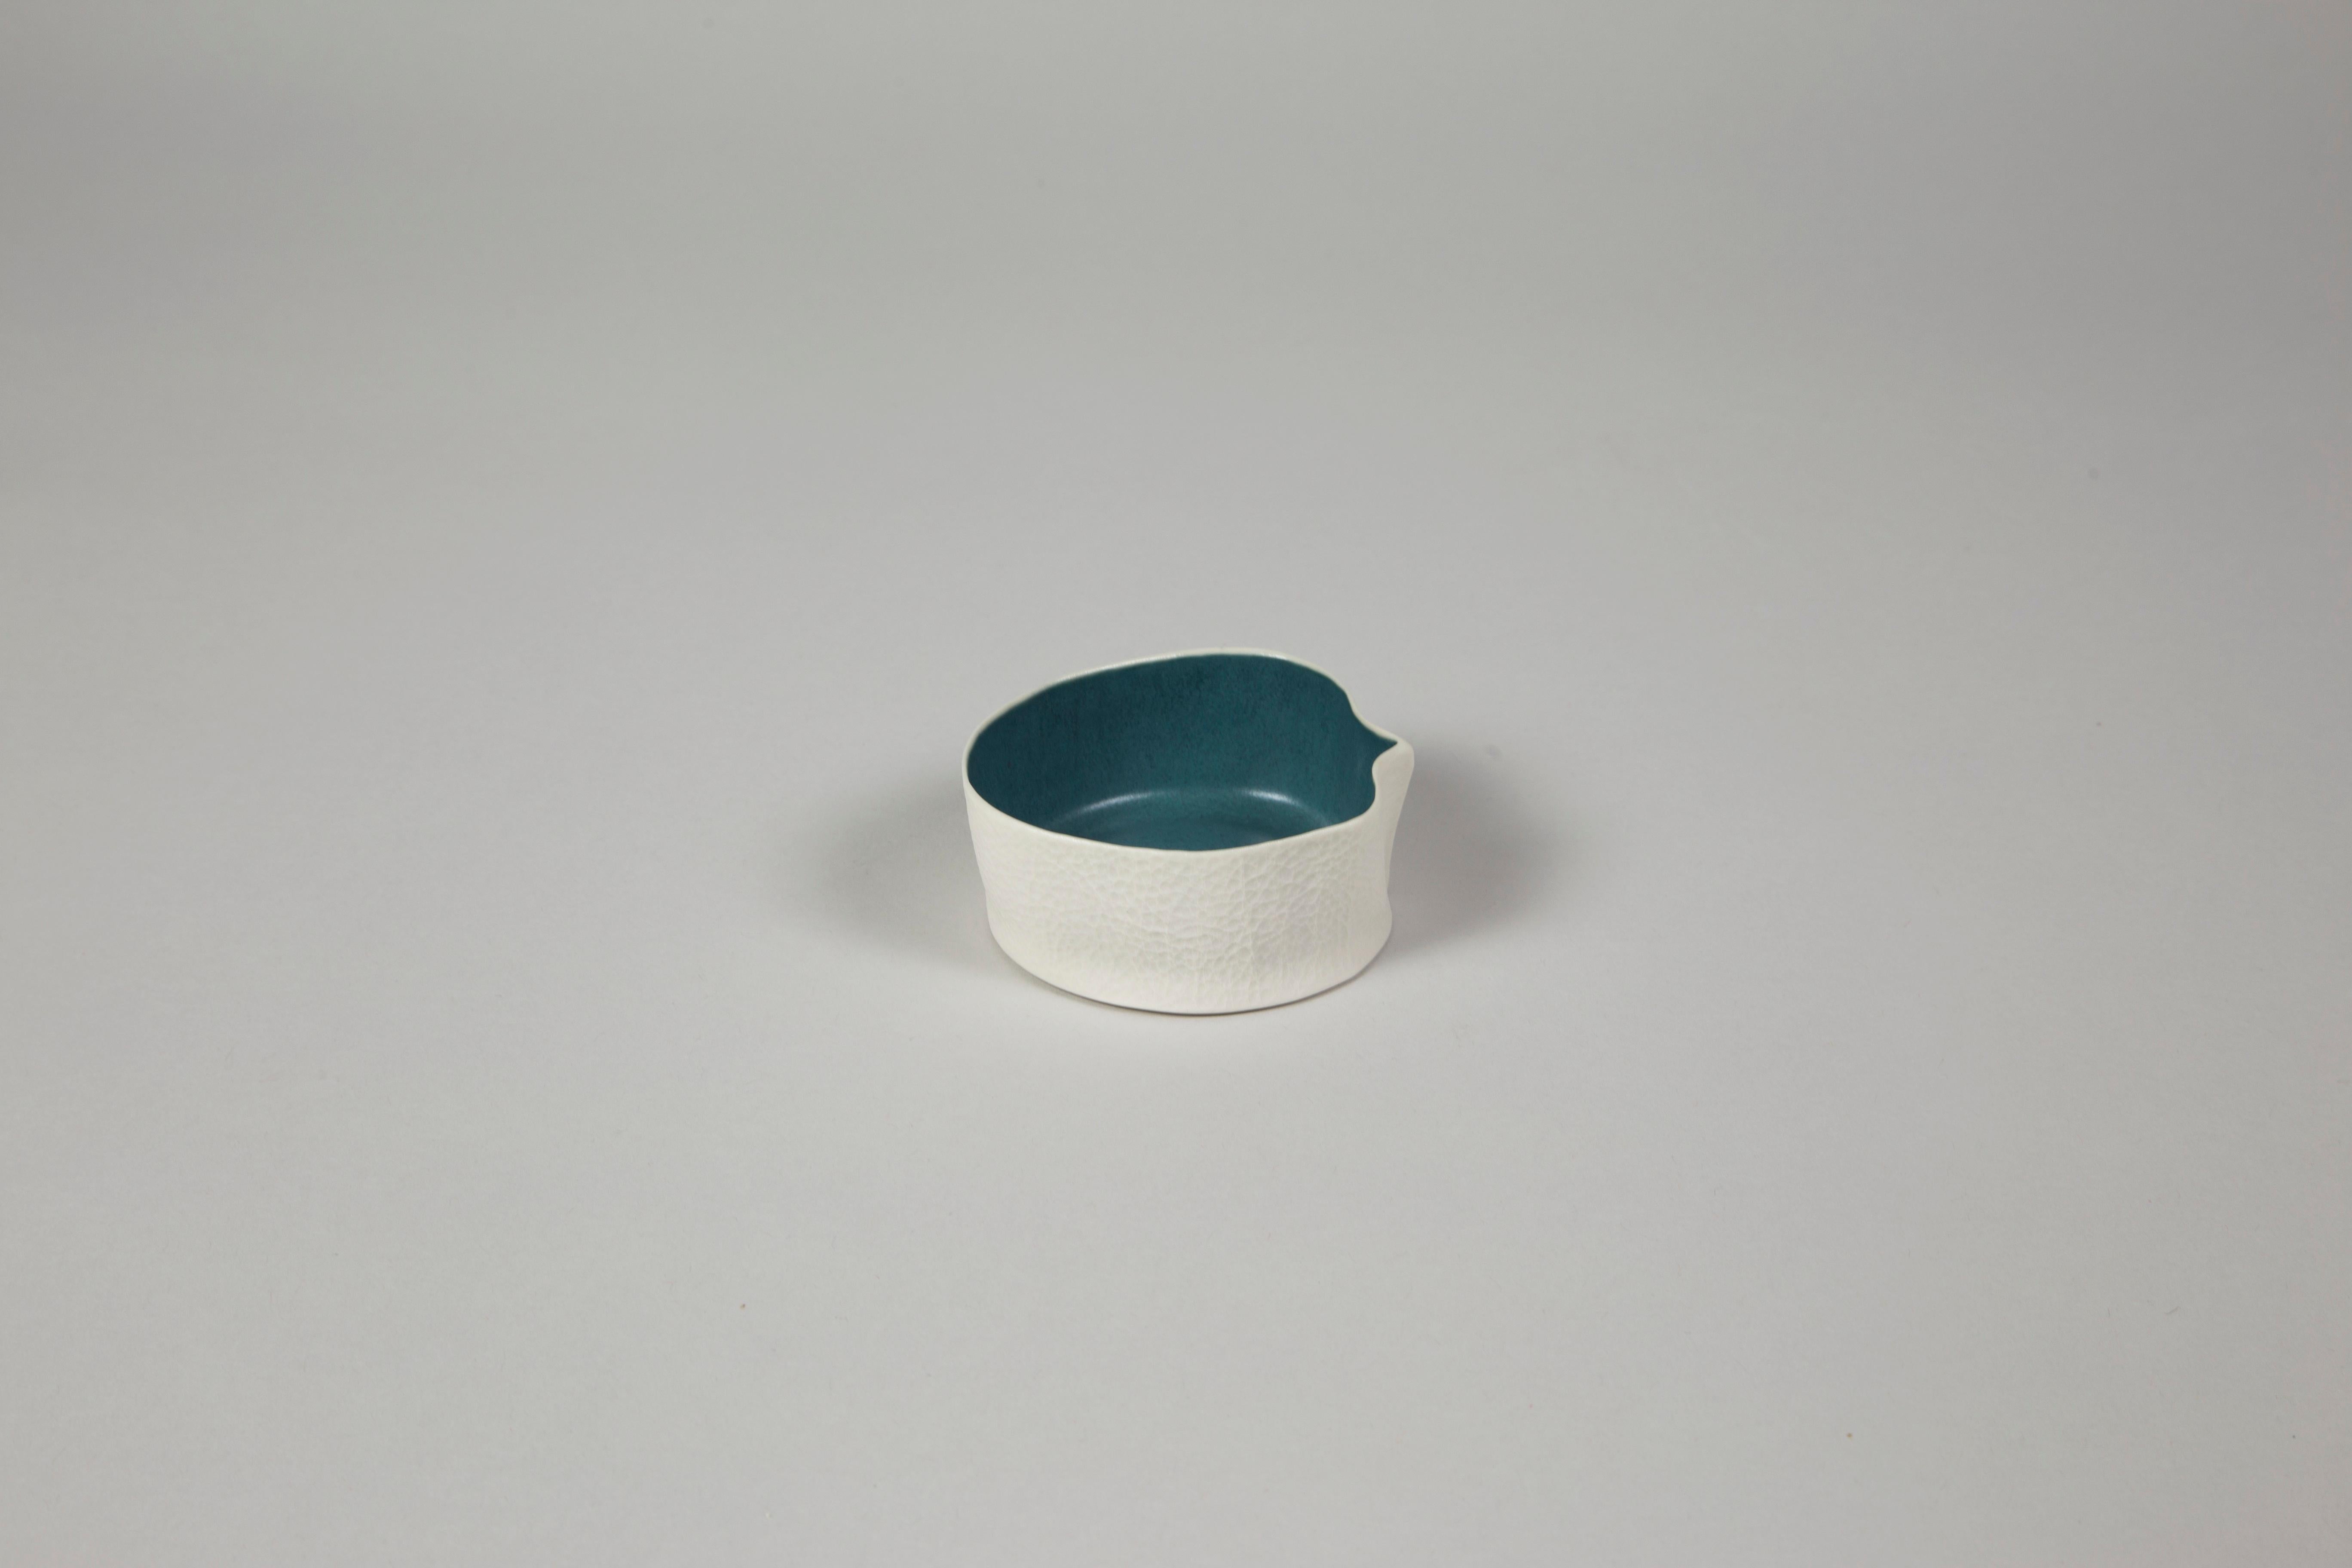 An organic shaped porcelain bowl with a tactile exterior surface and a smooth glazed interior. Small & precious, yet surprisingly practical, the Kawa Dishes are equally well-suited as a jewelry dish, salt cellar, sauces & dips bowl. As a result of